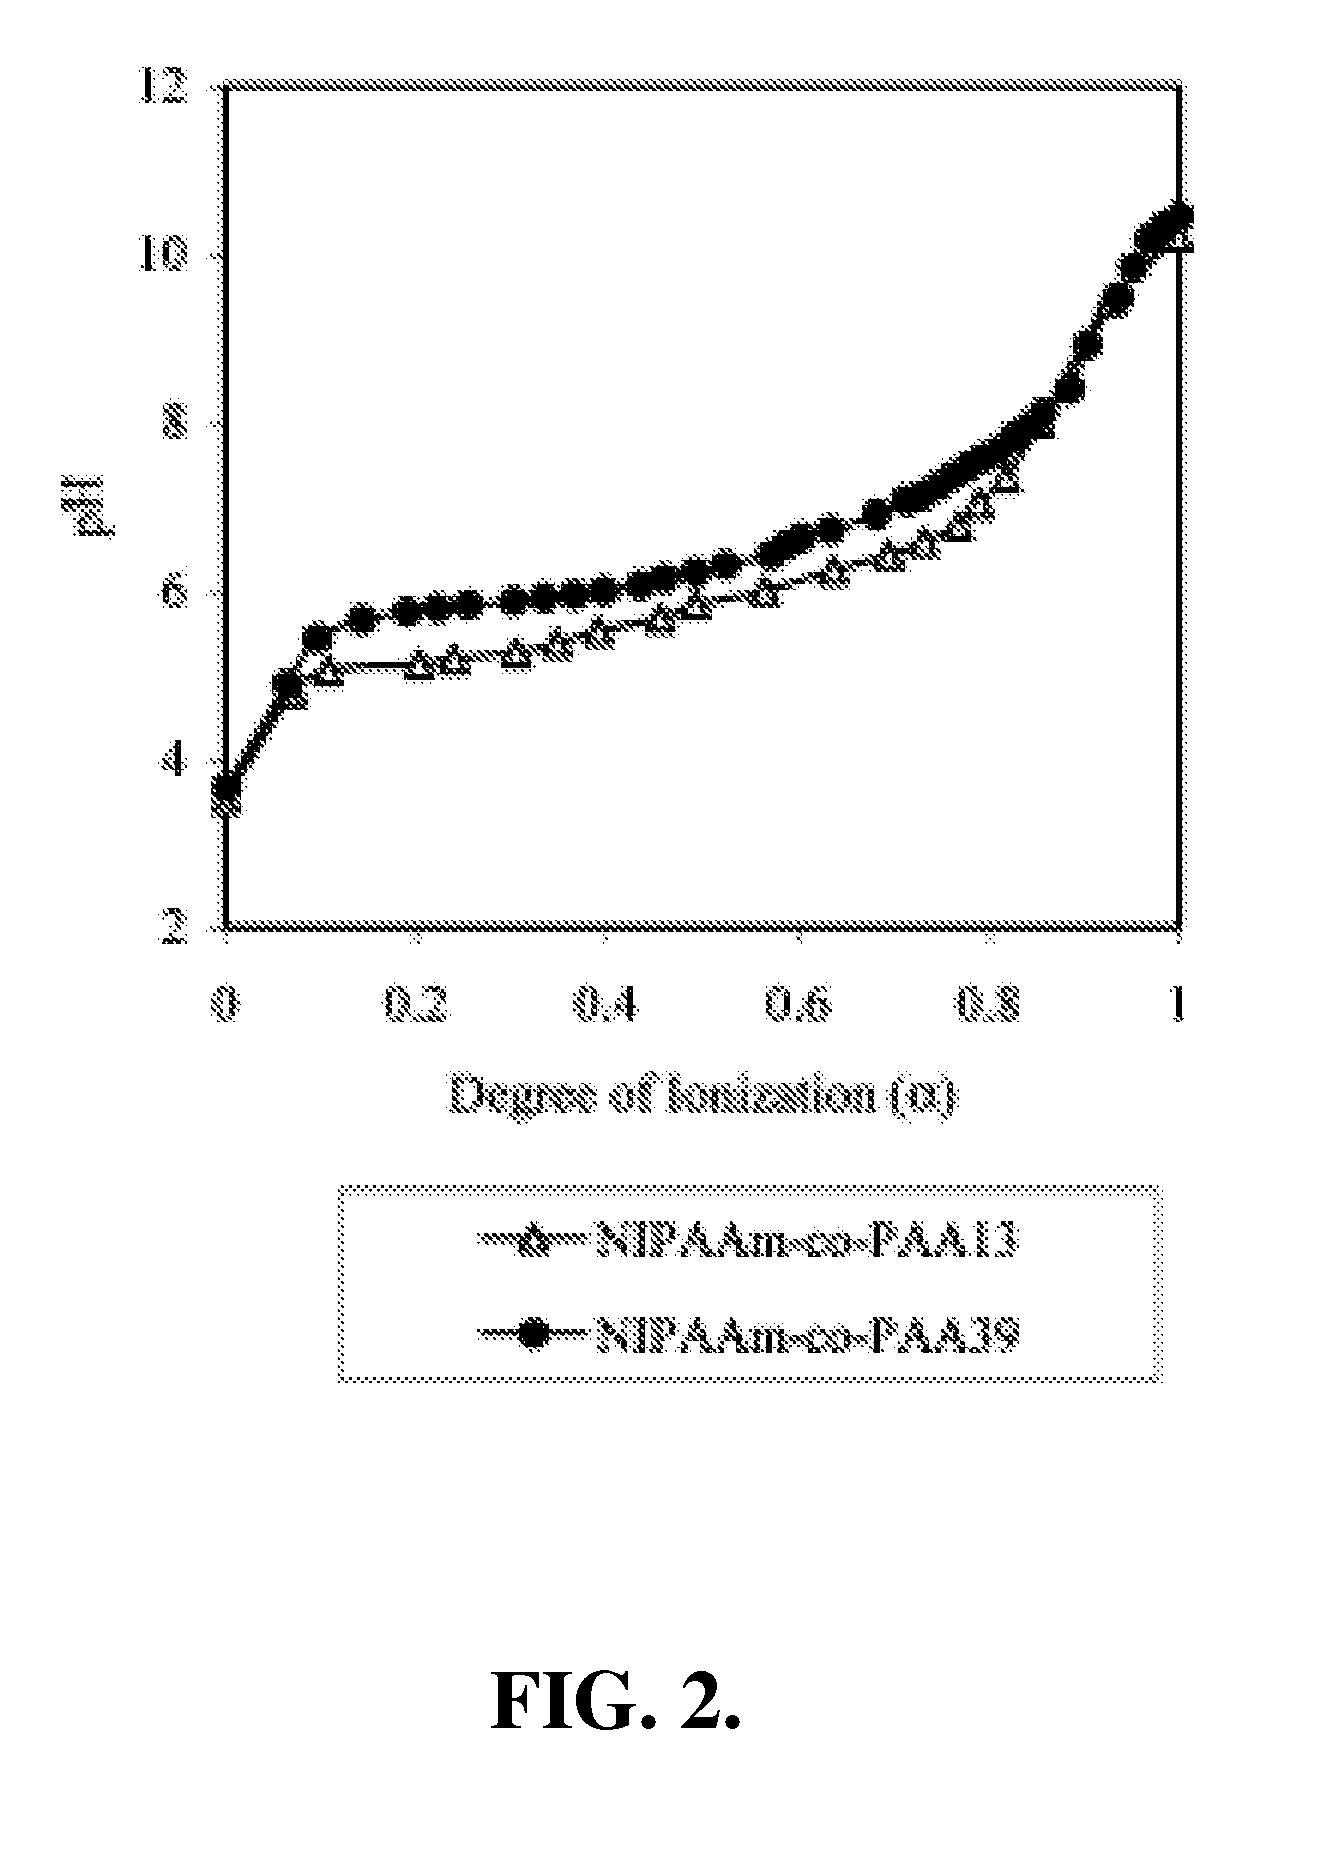 Temperature- and pH-responsive polymer compositions